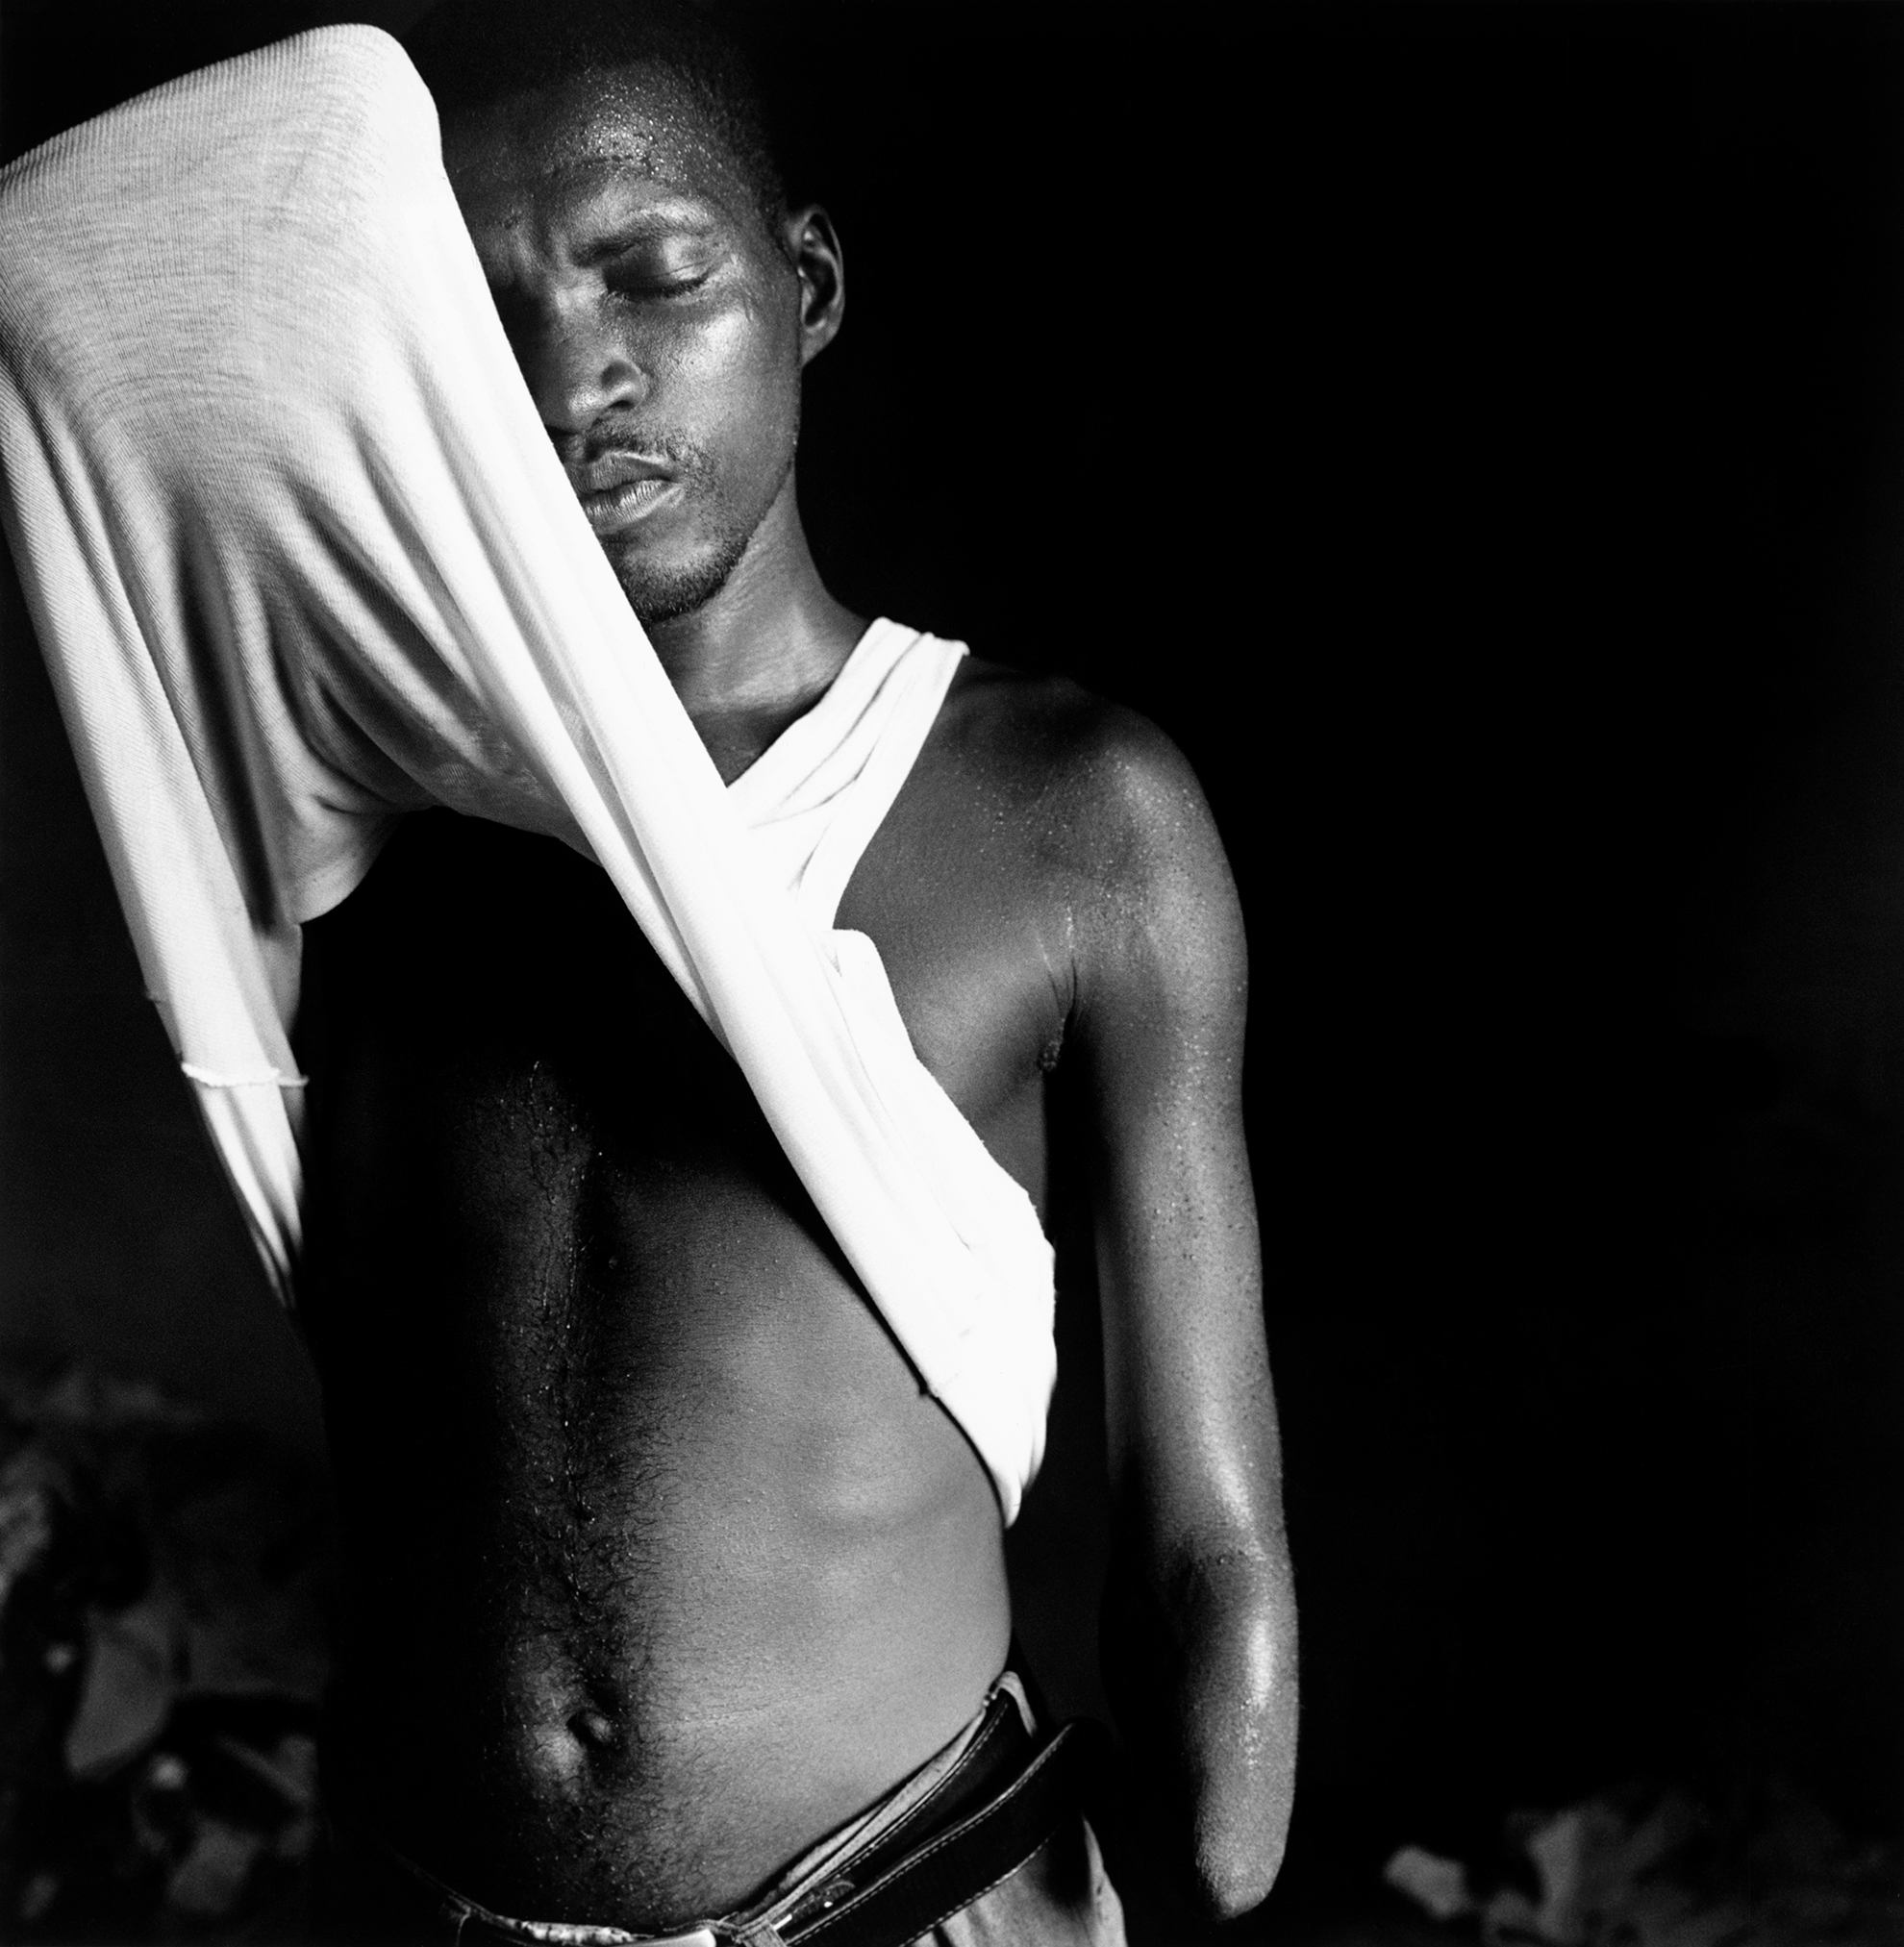 Abu Bakarr Kargbo, 31, was amputated by the rebels at the eastern part of Freetown on January the 20th, 1999. Unlike other amputees, he was not given the choice of what version of 'cut arm' or 'cut hand' he wanted- long sleeves or short sleeves. Today, he lives with his wife and his three children in an abandoned amputee camp northwest of Freetown. Abu used to be a construction worker. As many other war amputees, refuses to have artificial limps fitted and struggles to support his family by begging in the streets, not far from where he suffered his amputation.